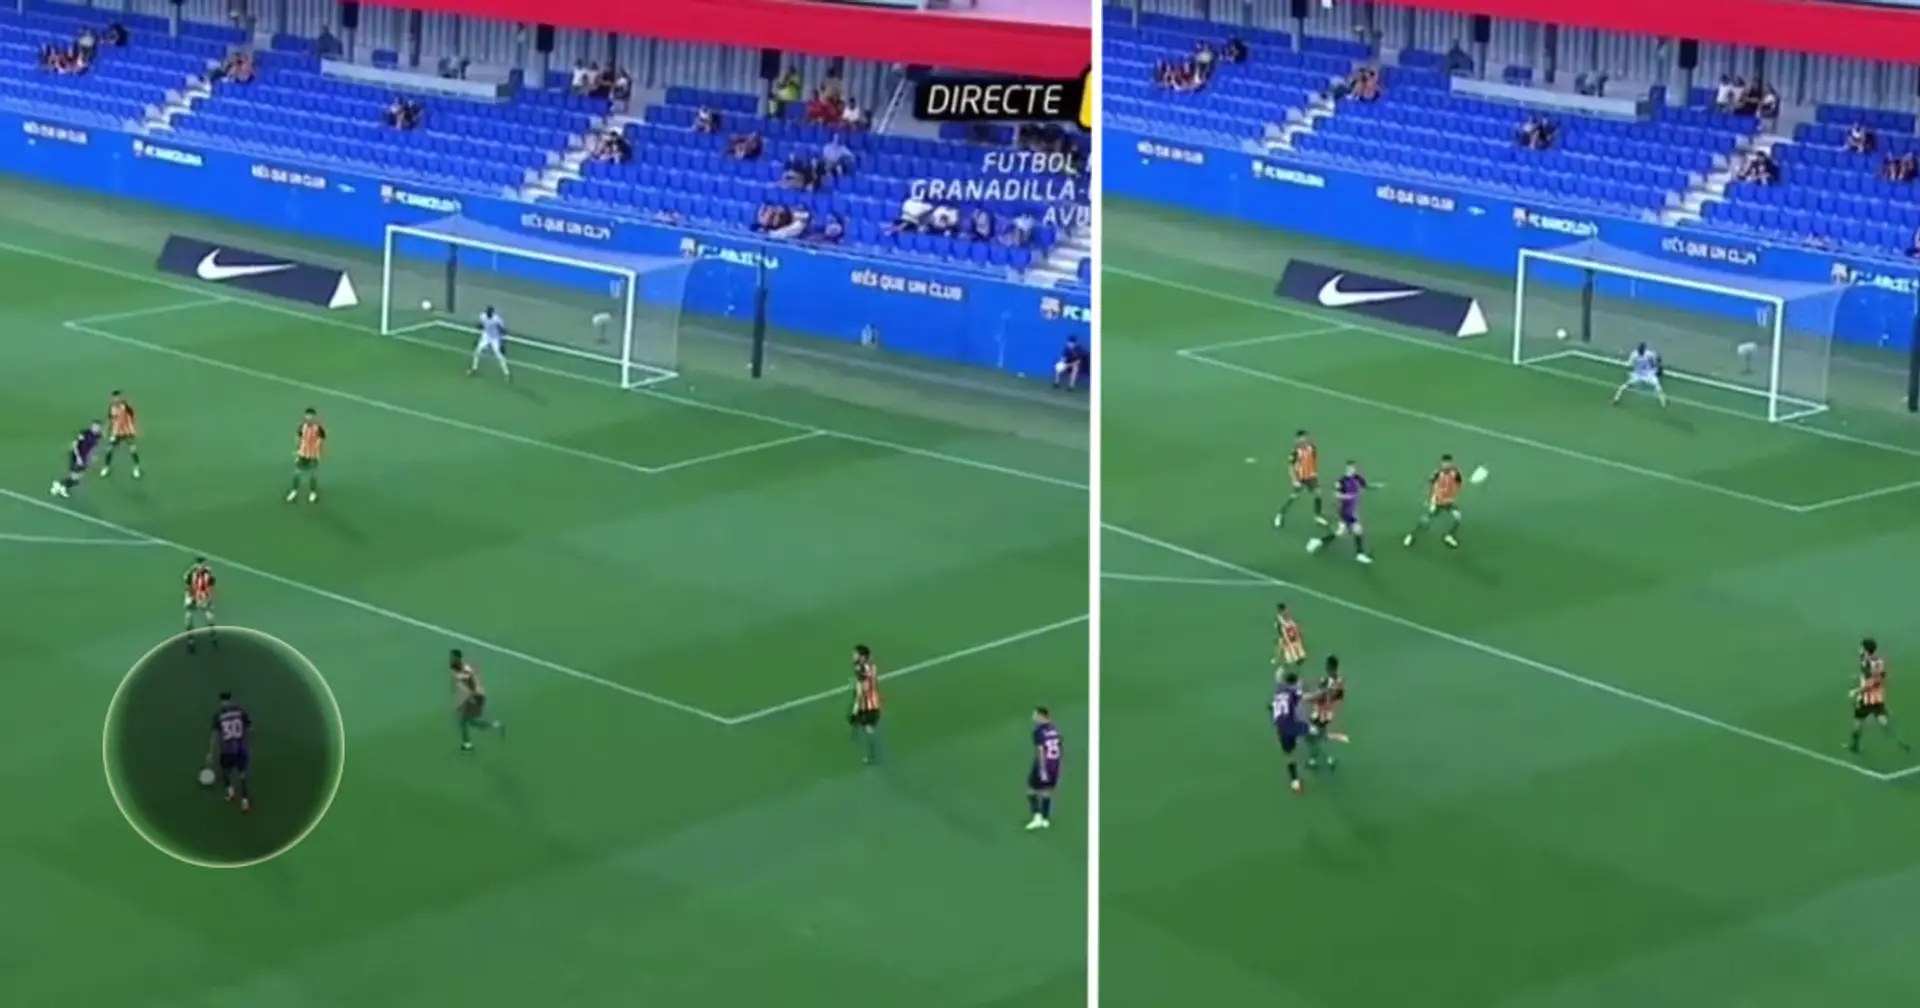 Youngsters score 2 incredible goals as Barca Atletic open league season with dramatic win